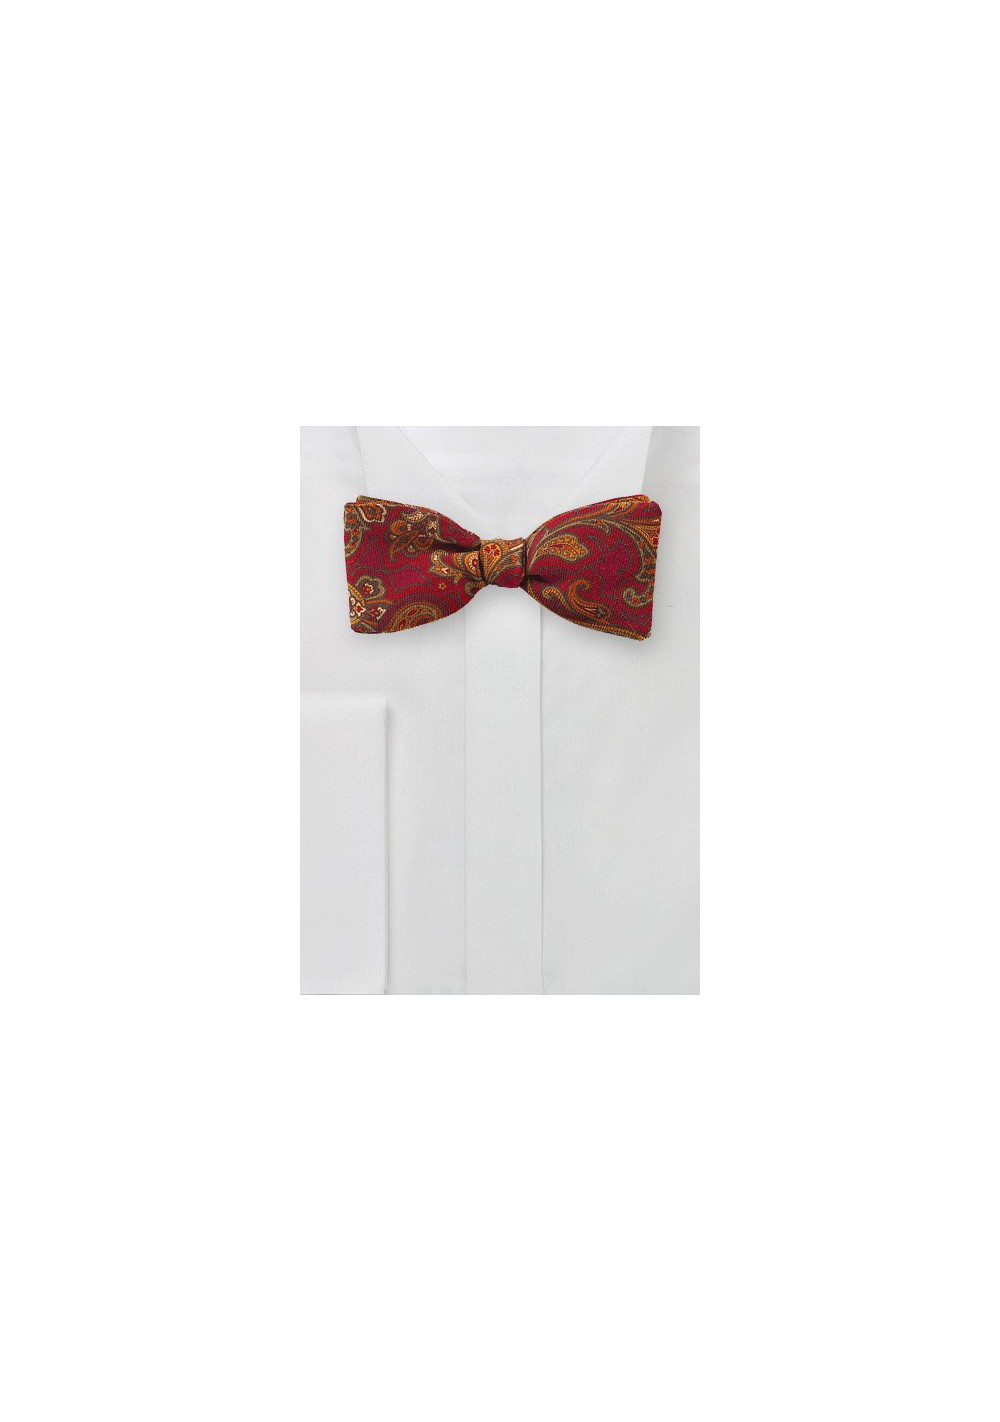 Vintage Paisley Bow Tie in Red